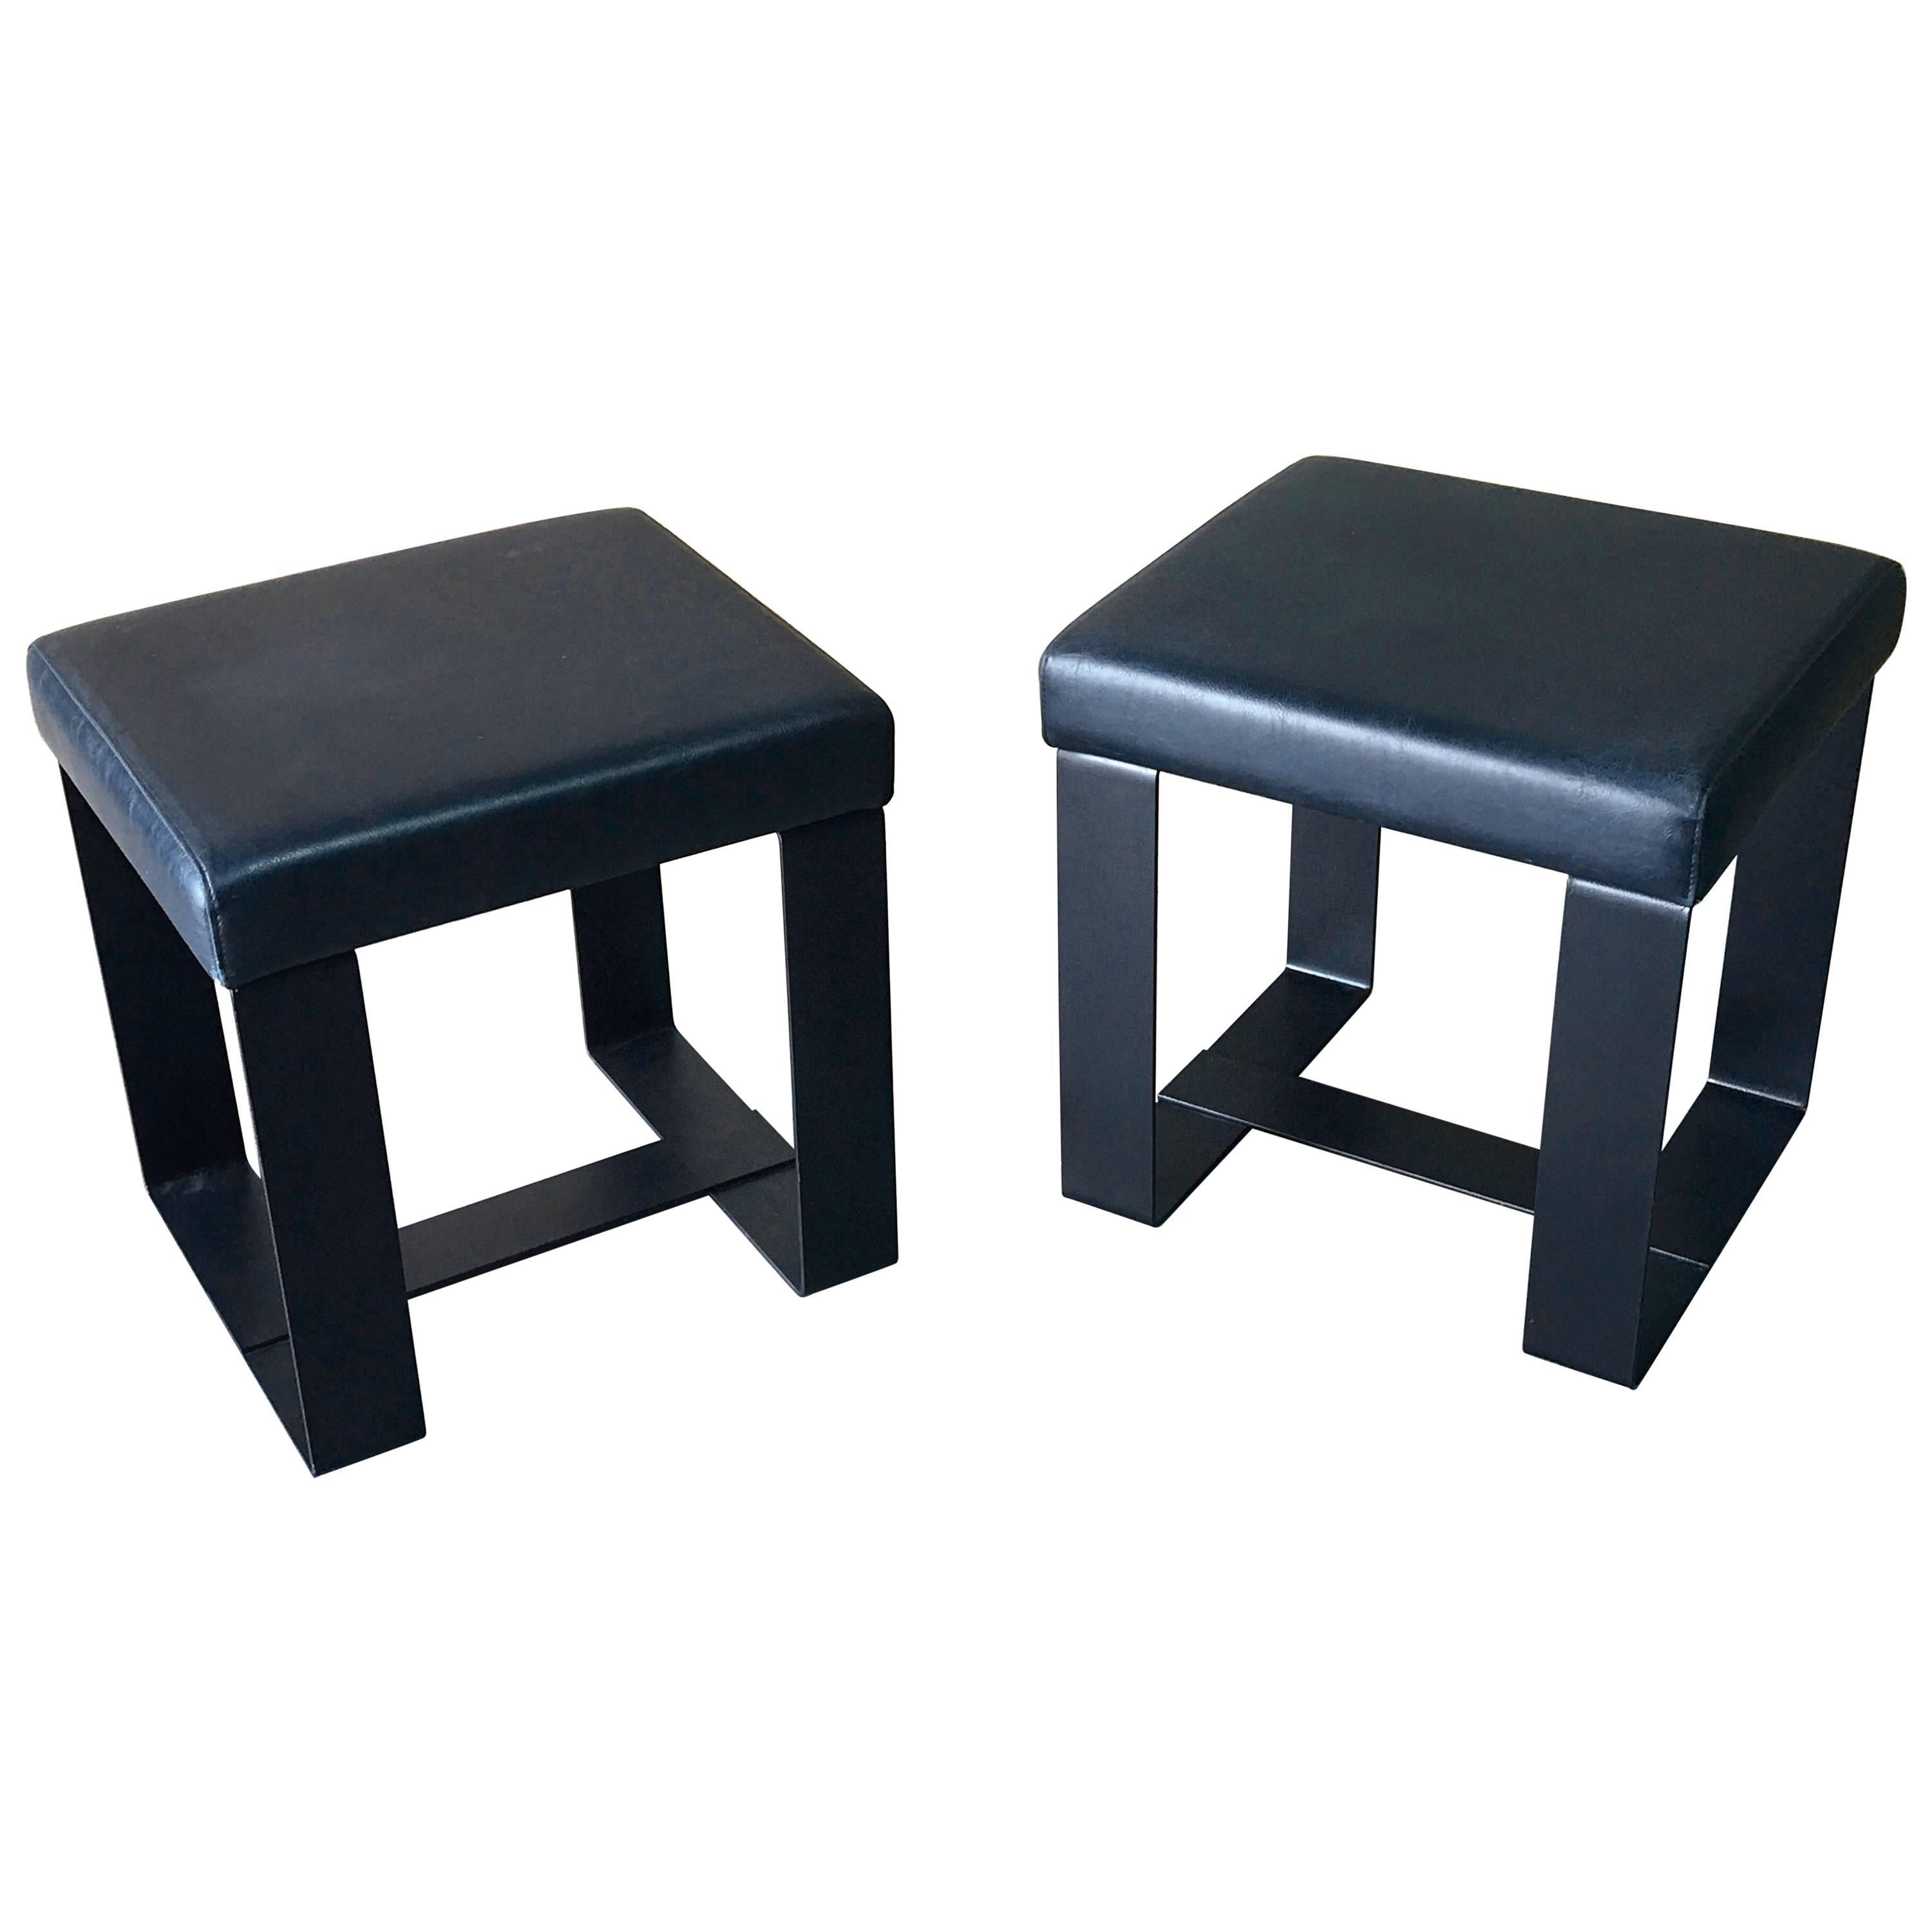 Pair of French Modern Iron and Leather Cube Benches